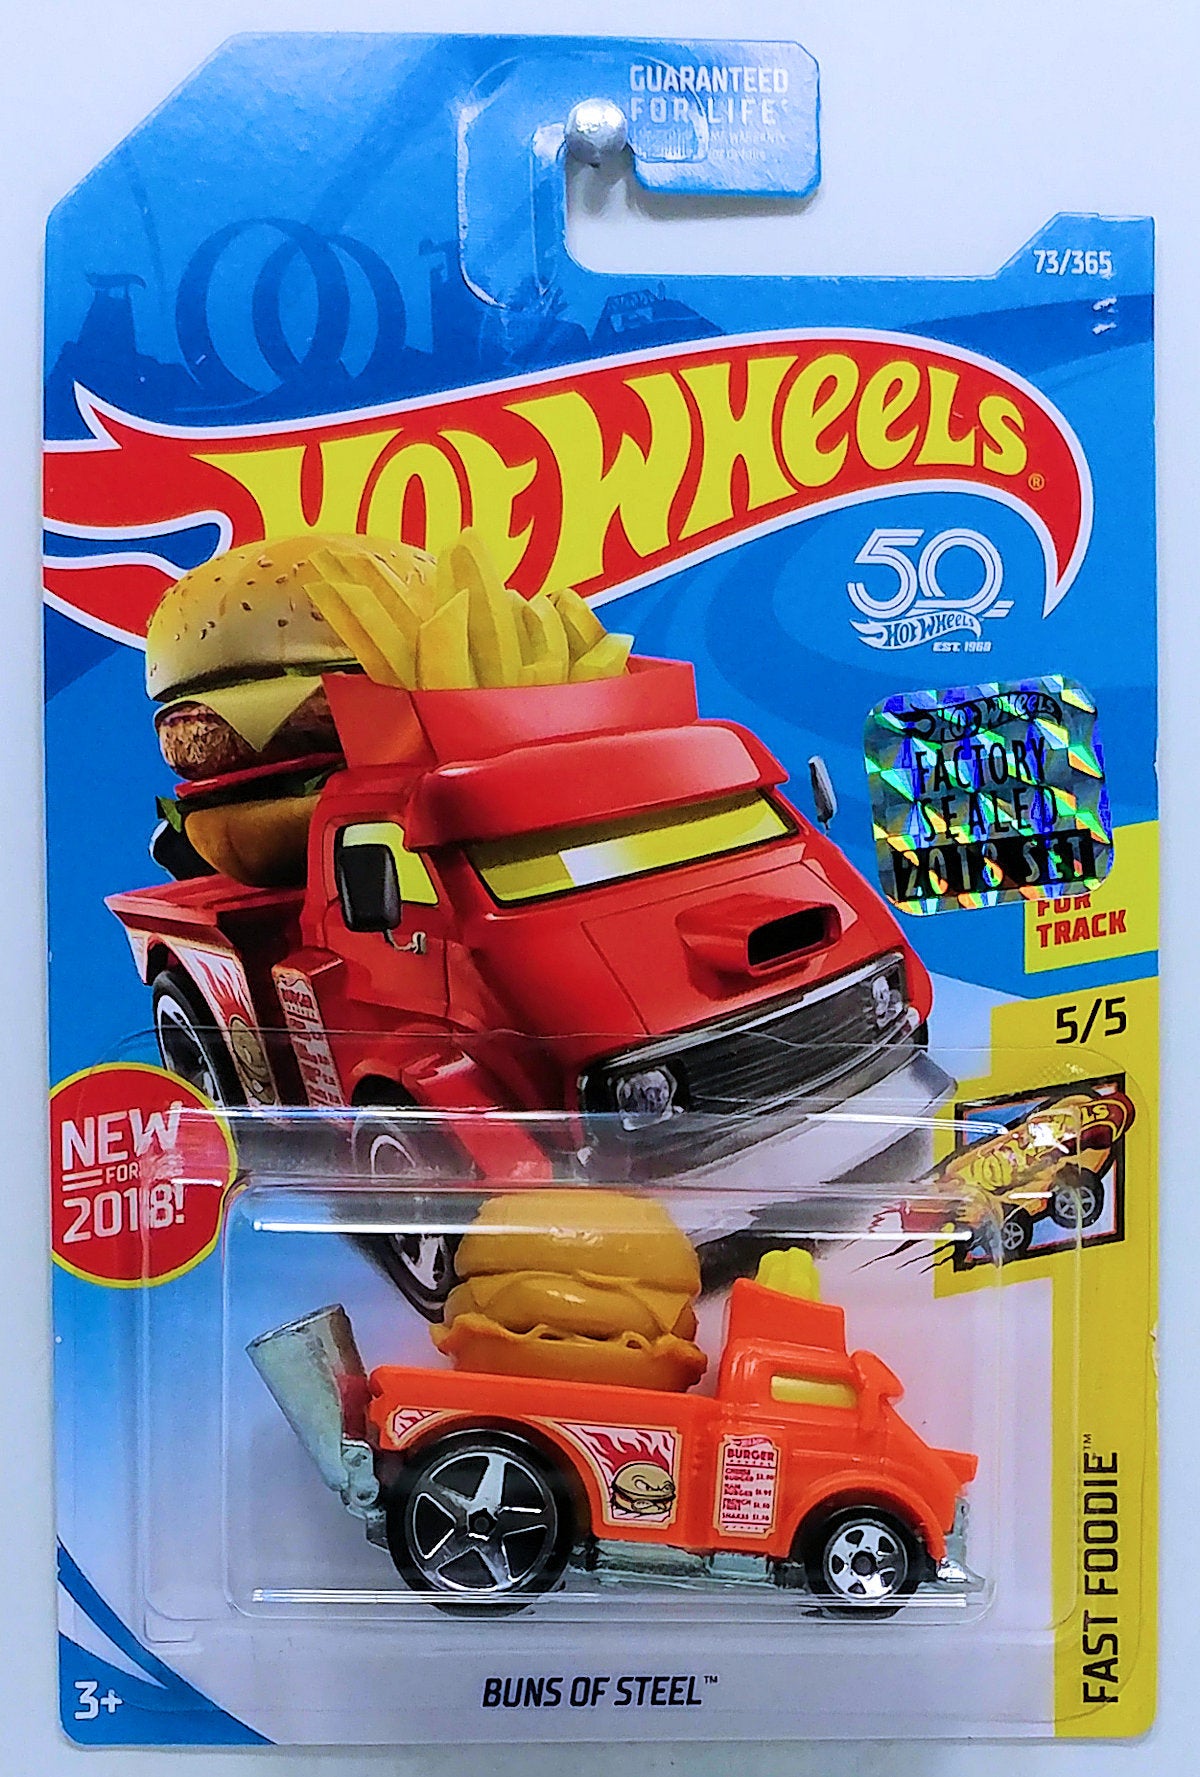 Hot Wheels 2018 - Collector # 237/365 - Fast Foodie 5/5 - Buns of Steel - Orange  -  50th Card with FSS